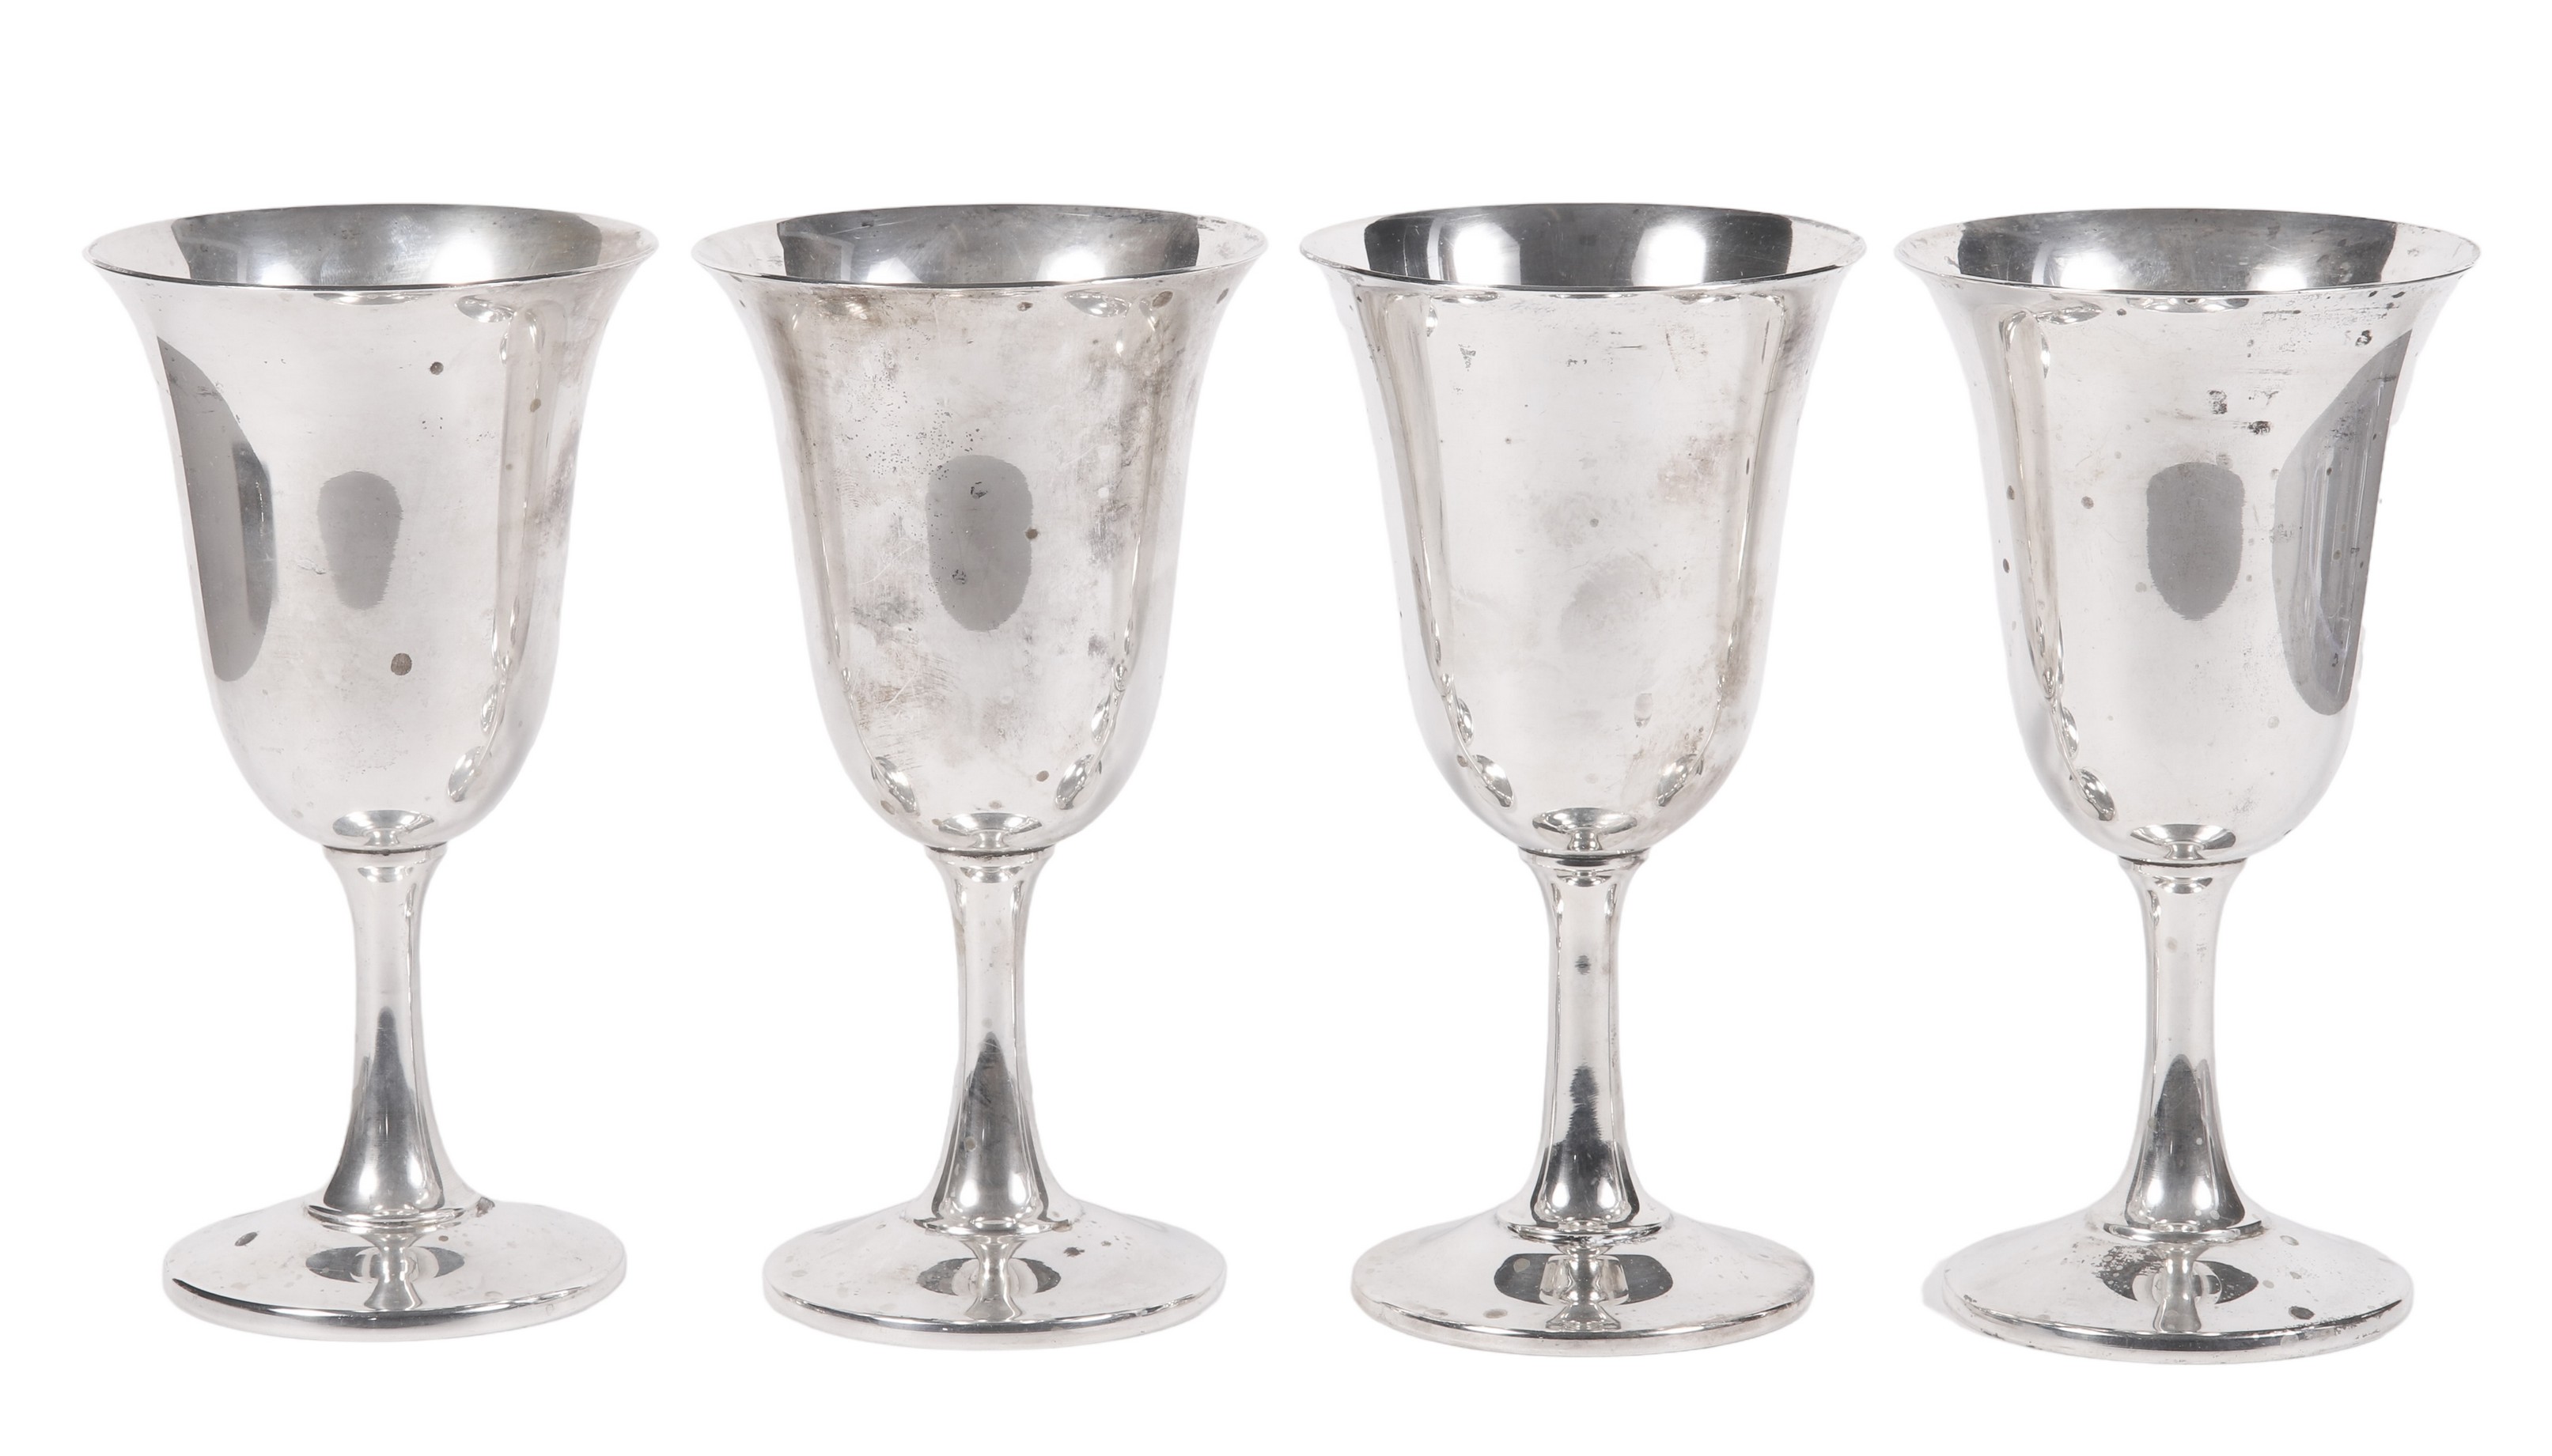  4 Wallace sterling goblets 6 3 4  2e1291